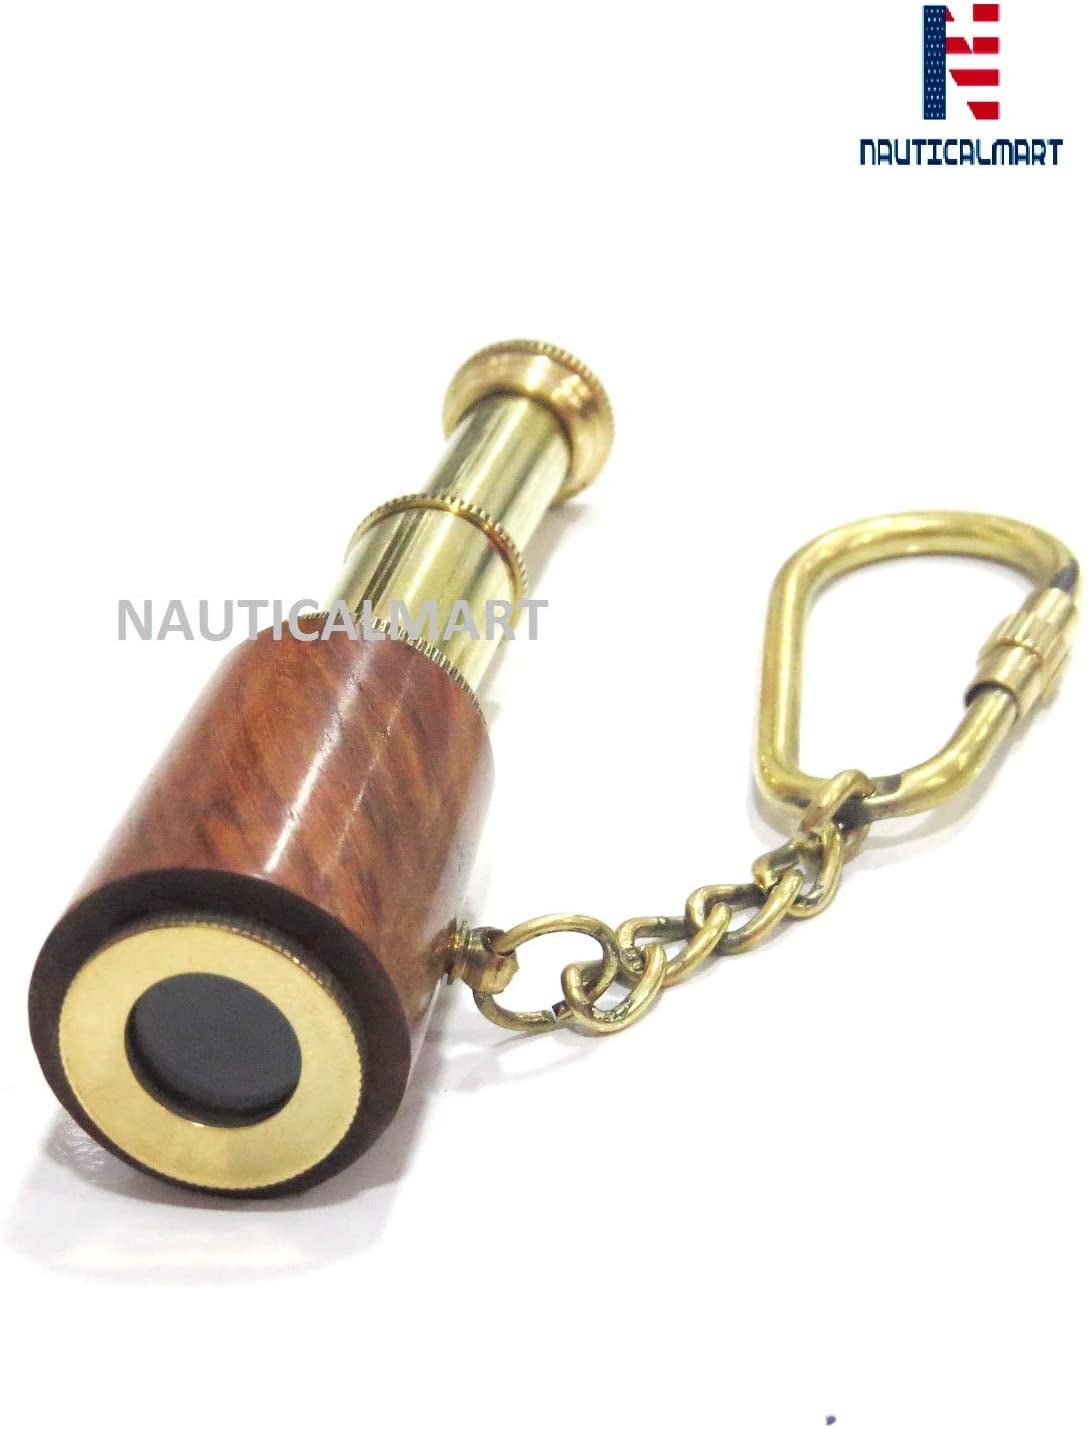 Nautical Brass Scout Whistle Keychain Lot of 50 Pieces British Police Keyring 